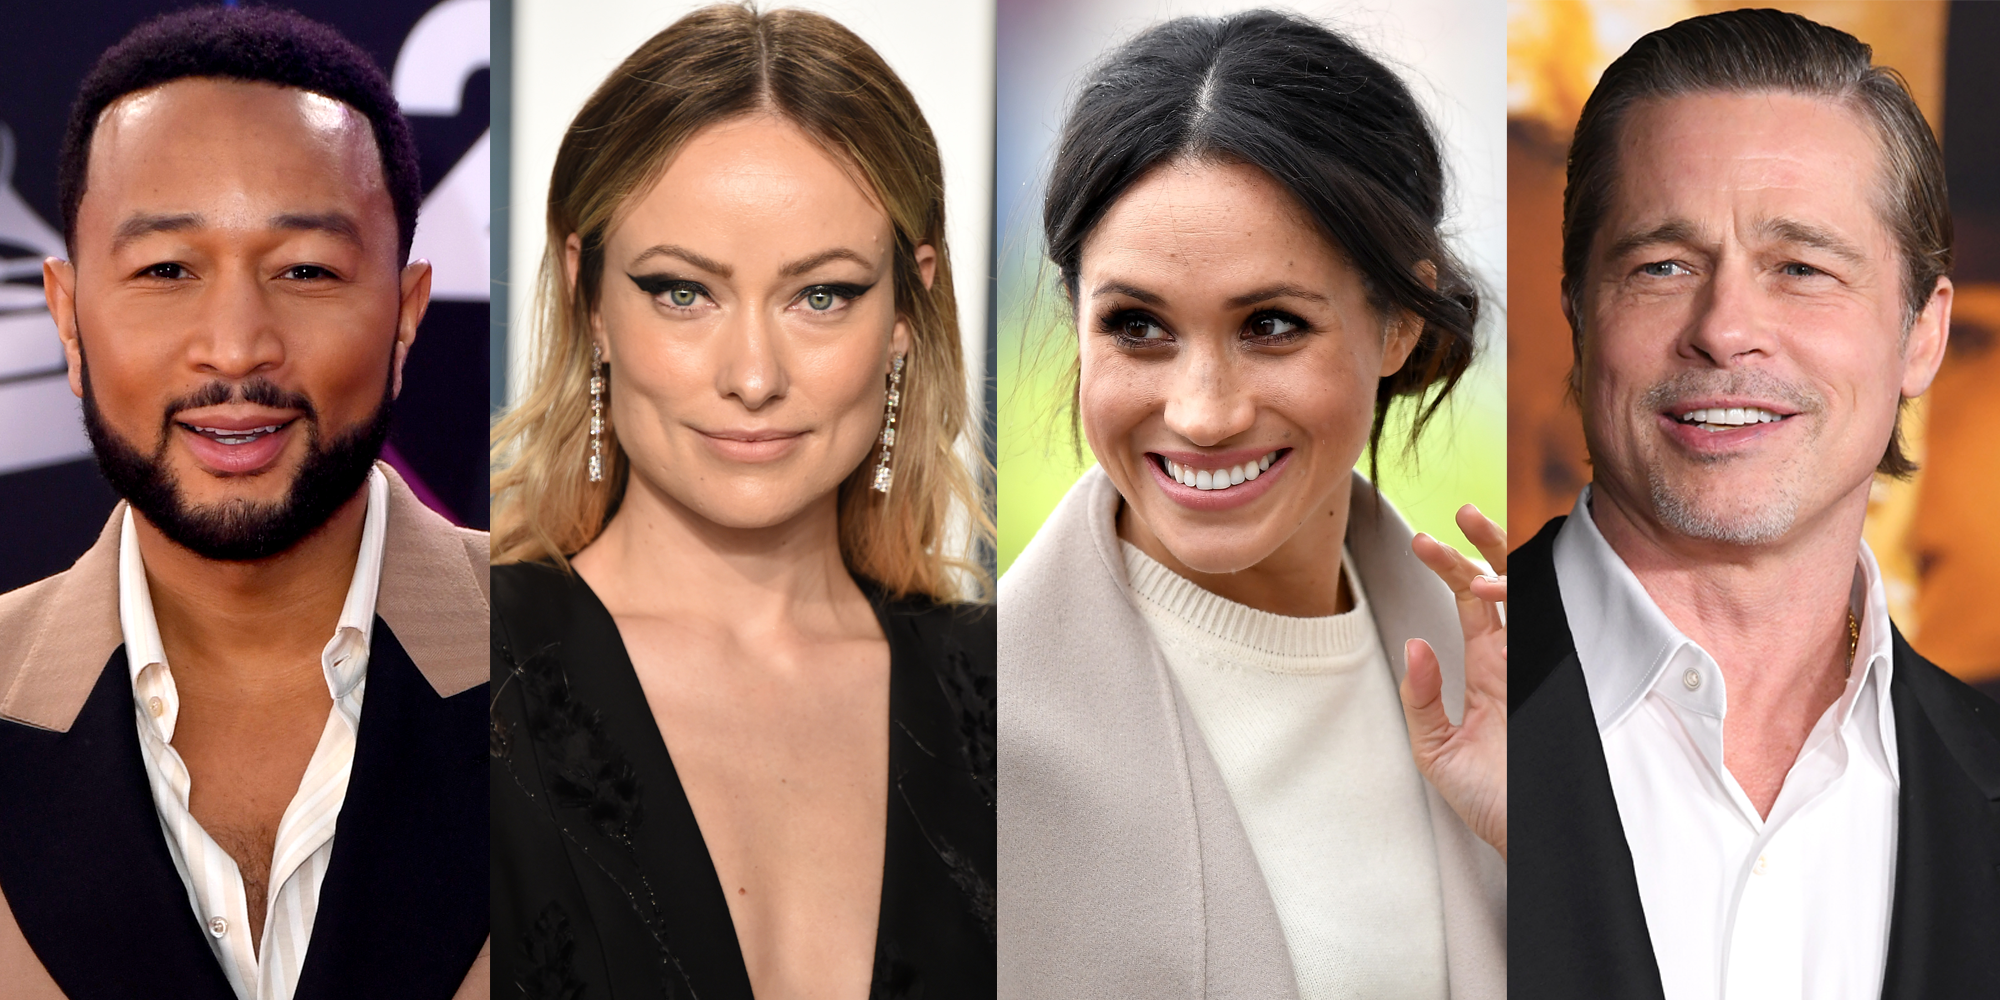 Celebs that went against tradition with their ring choices